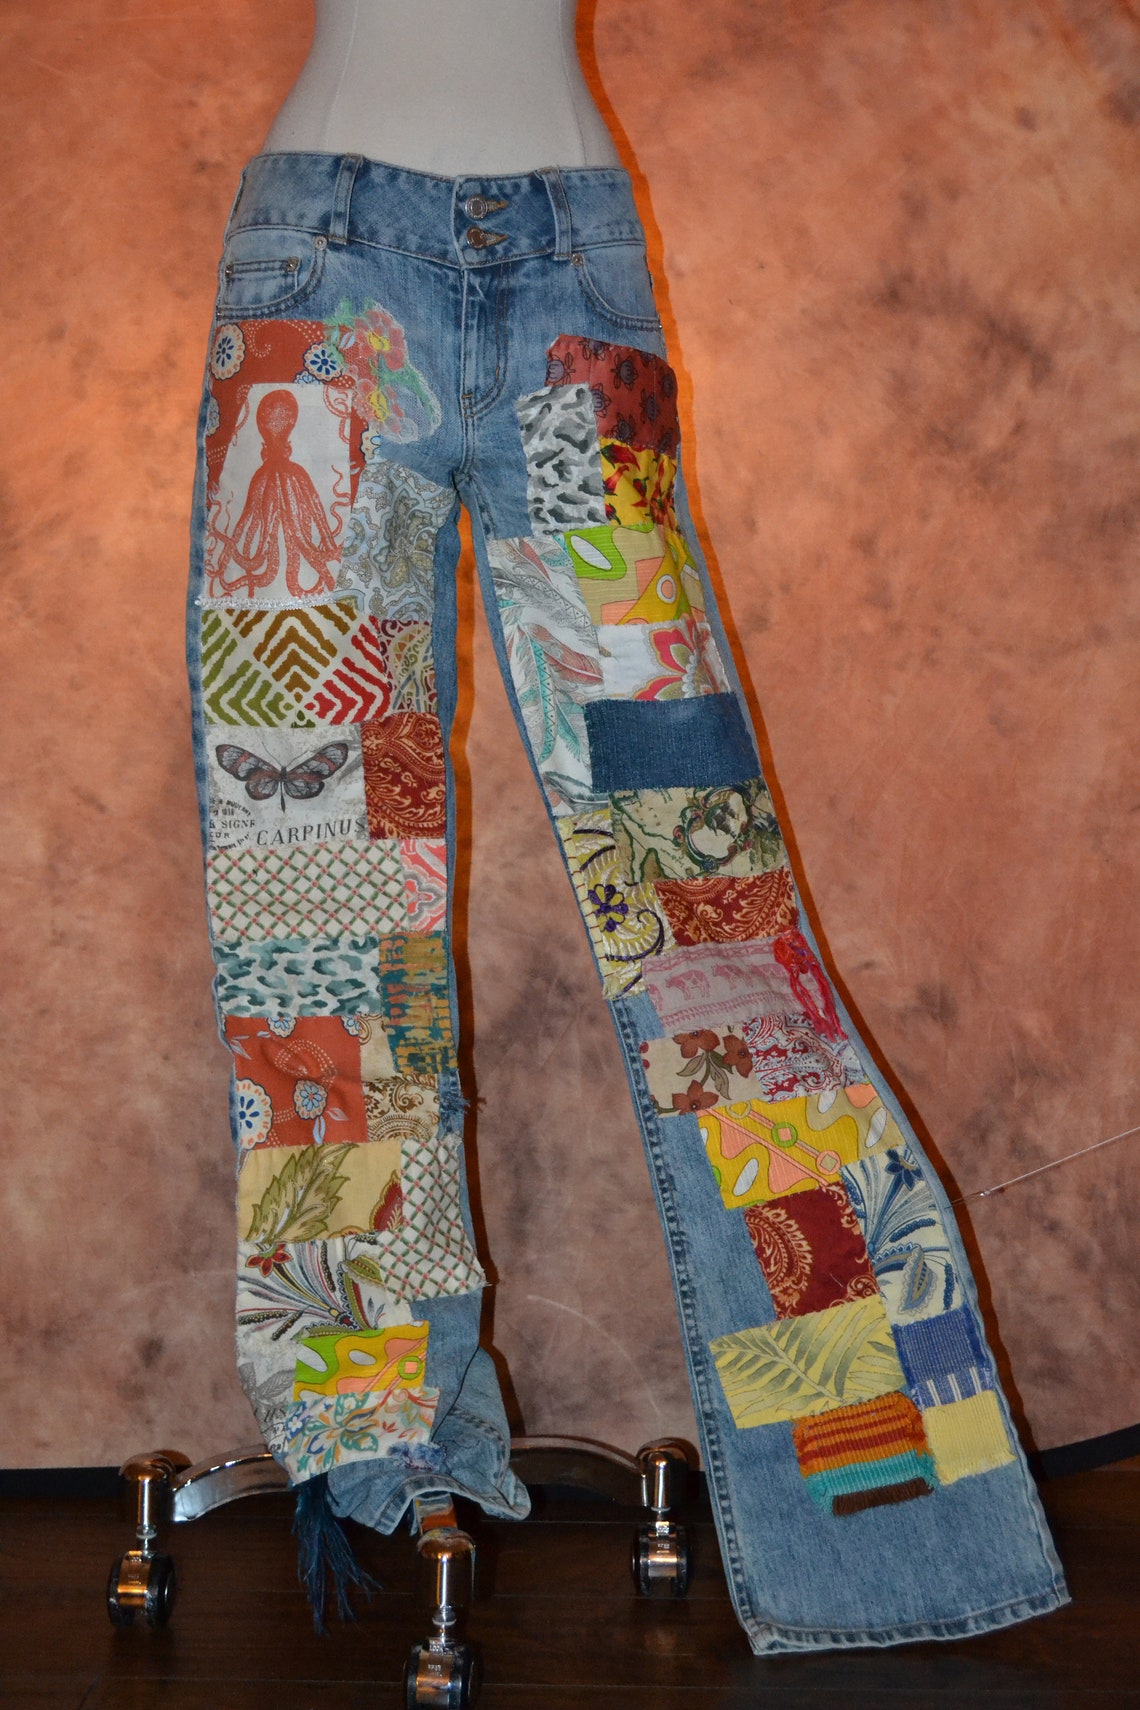 Patchwork Jeans Hand Stitched Women's Tall Jeans with | Etsy